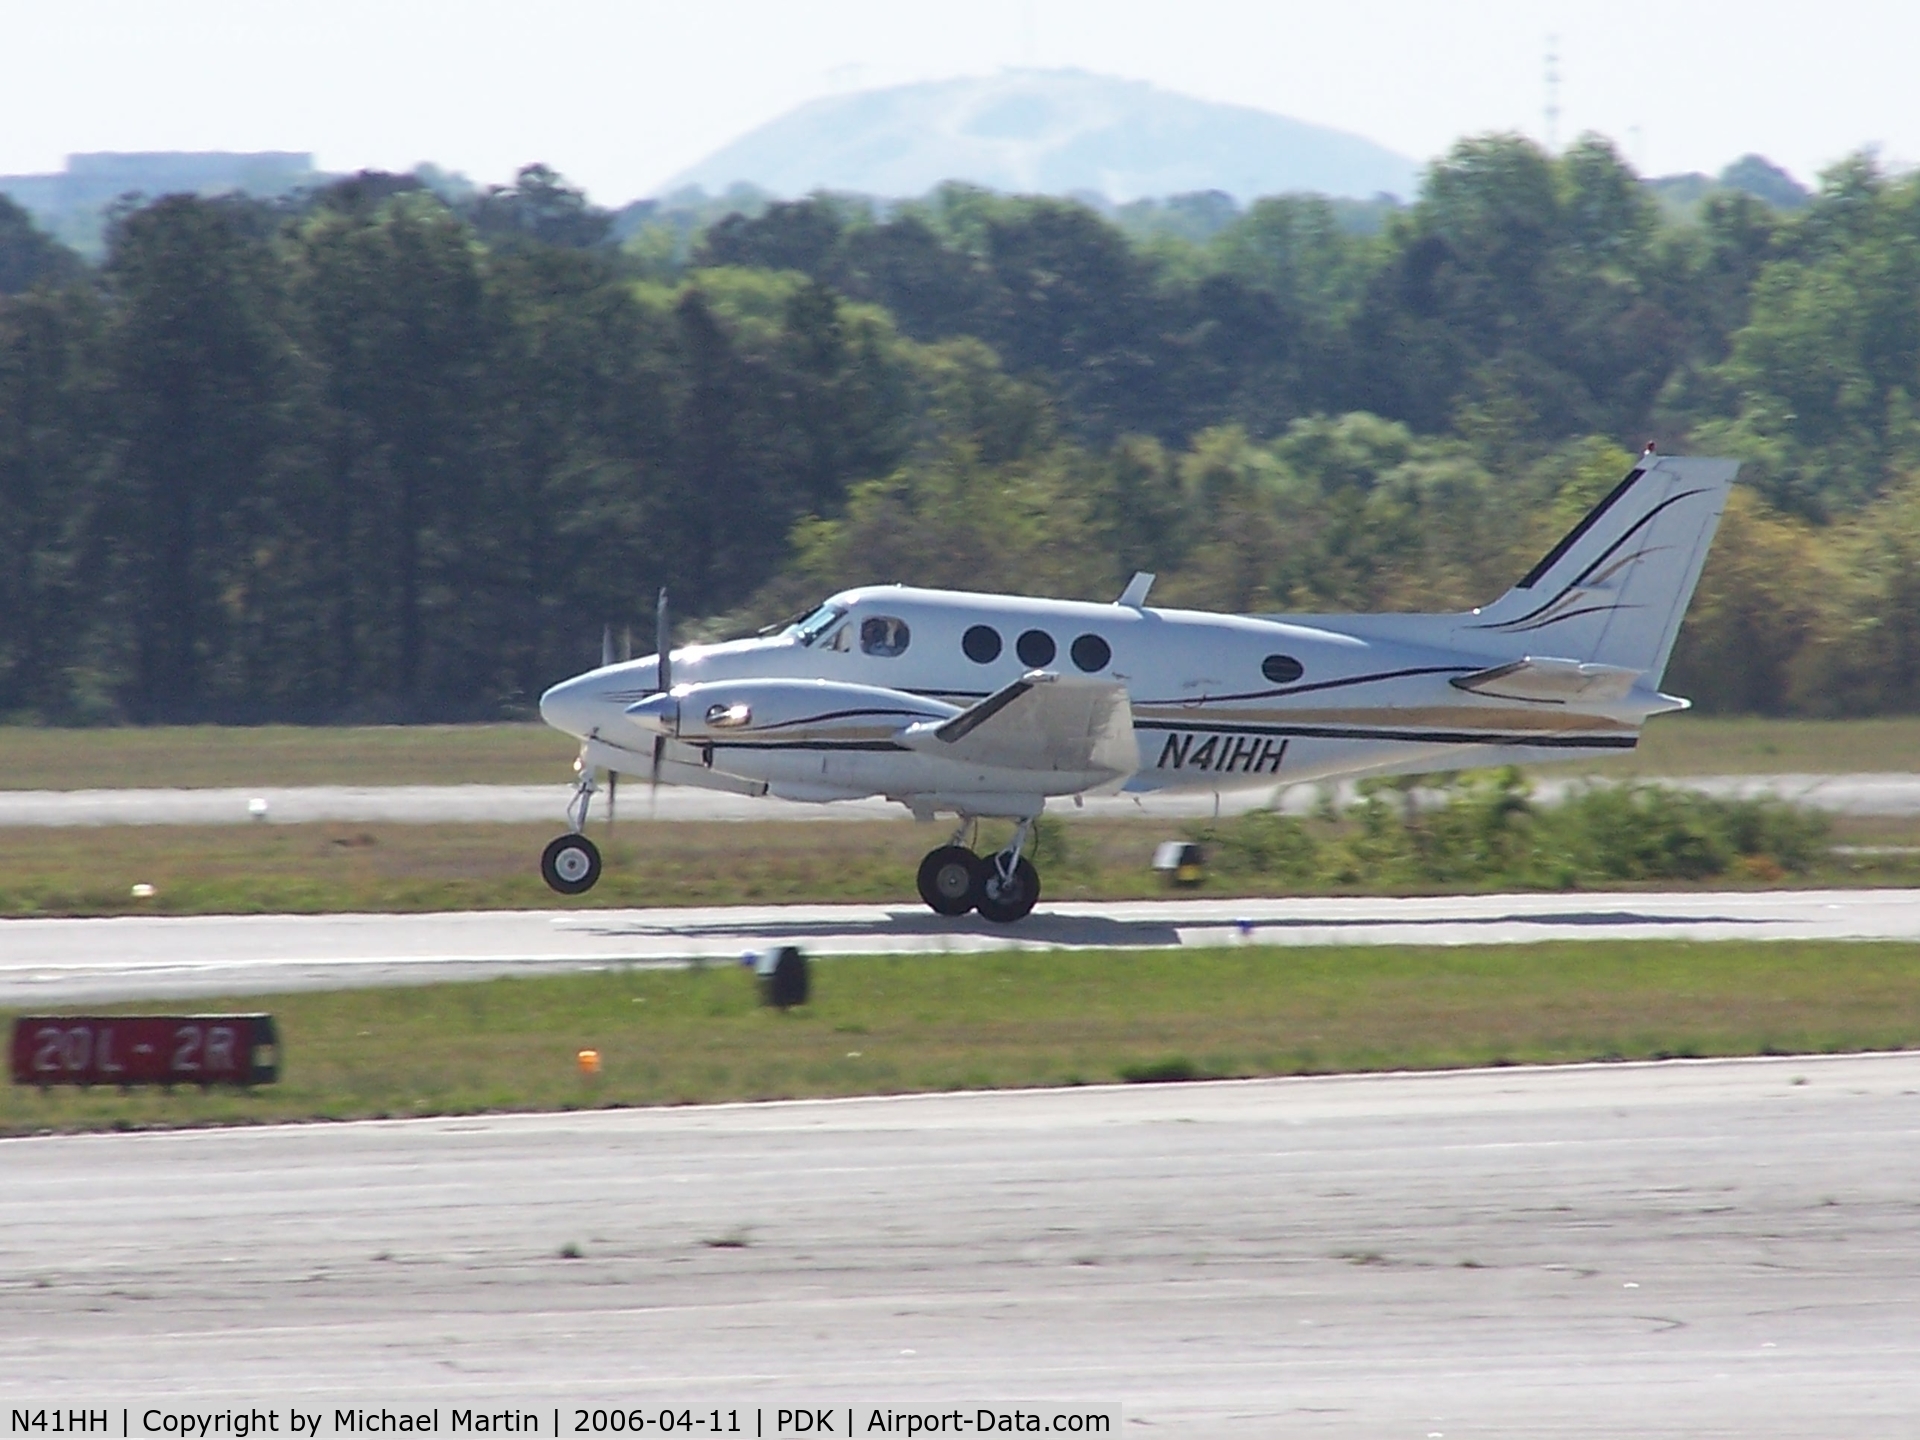 N41HH, 1975 Beech E-90 King Air C/N LW-146, Takeoff from 2R